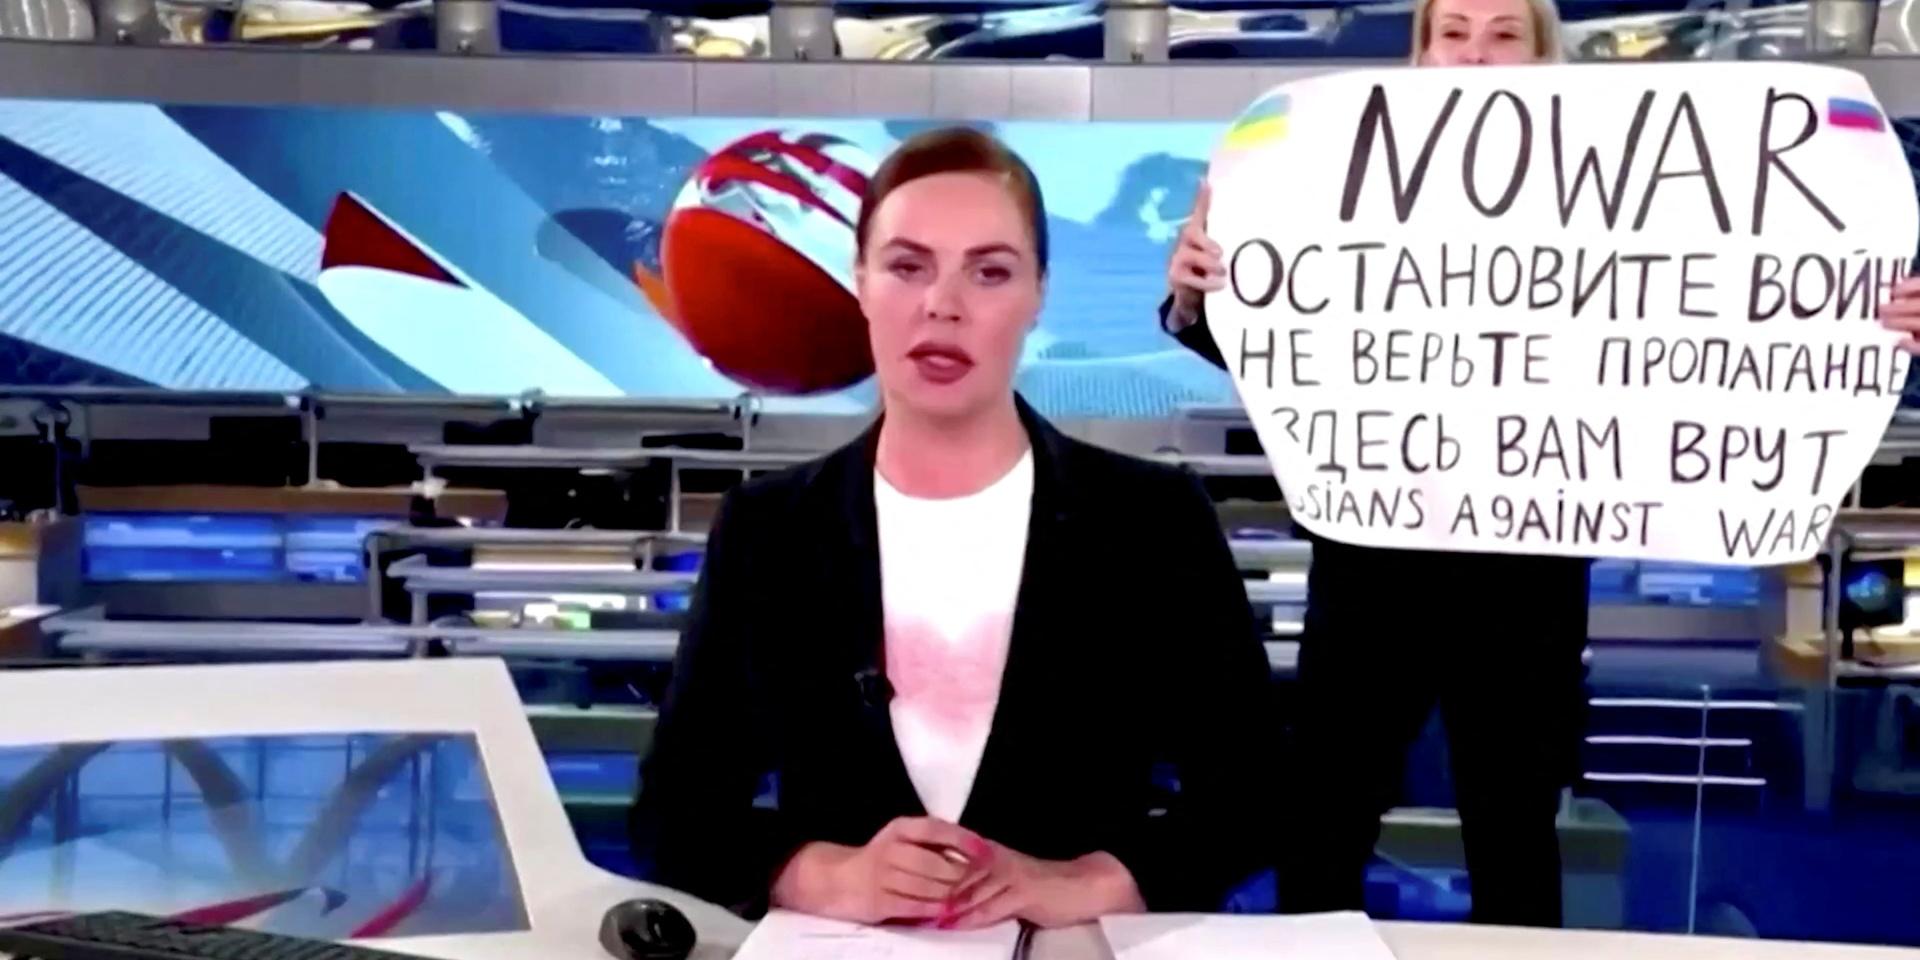 A person interrupts a live news bulletin on Russia's state TV "Channel One" holding up a sign that reads "NO WAR. Stop the war. Don't believe propaganda. They are lying to you here." at an unknown location in Russia March 14, 2022, in this still image obtained from a video uploaded on March 14. Channel One/via REUTERS THIS IMAGE HAS BEEN SUPPLIED BY A THIRD PARTY. NO RESALES. NO ARCHIVES.  X04130